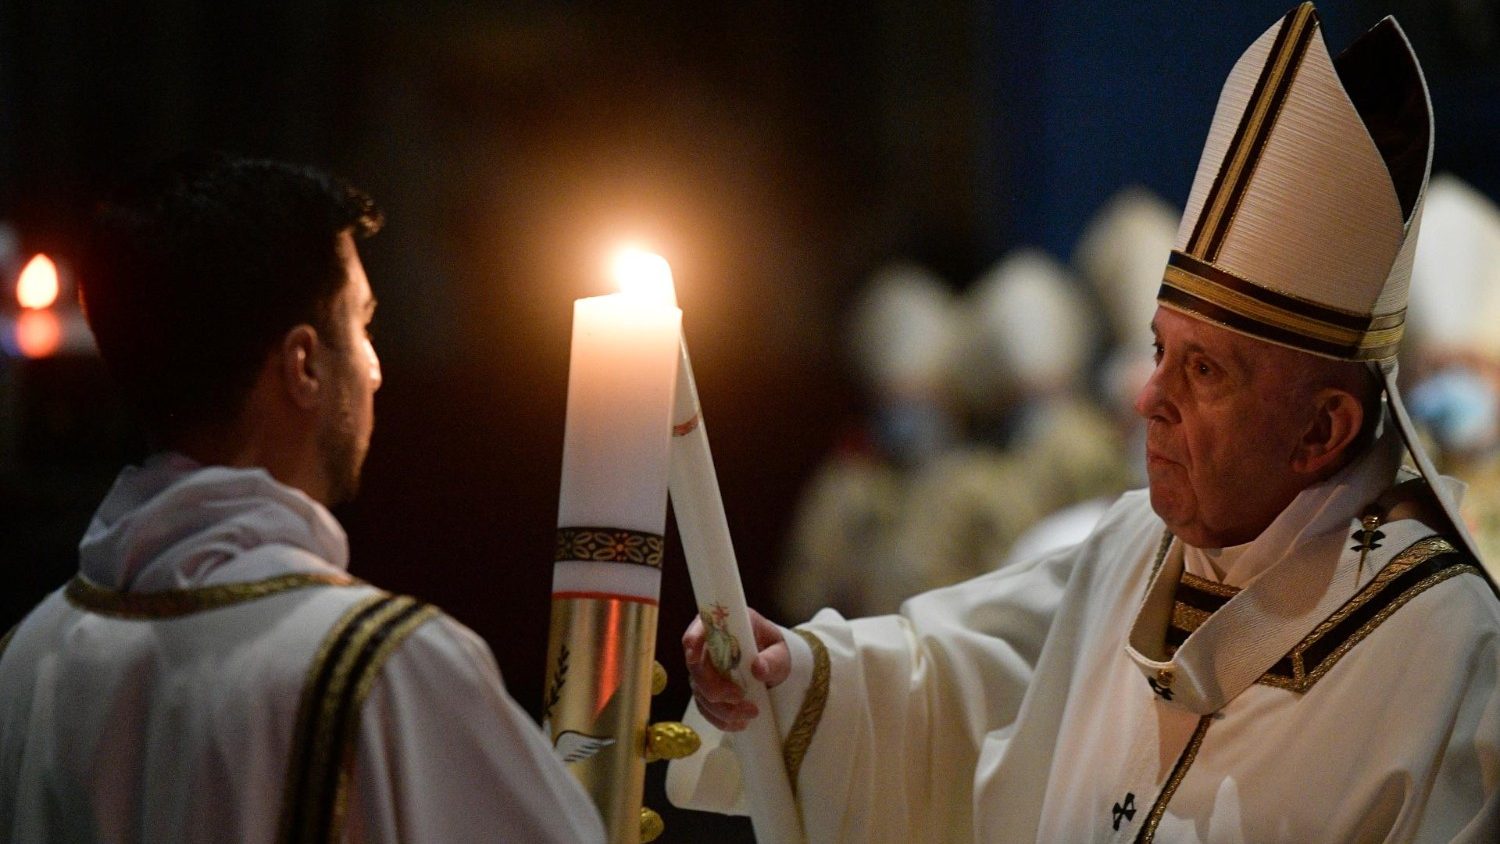 Pope during Easter vigil: Christ lives today, always helps to start anew